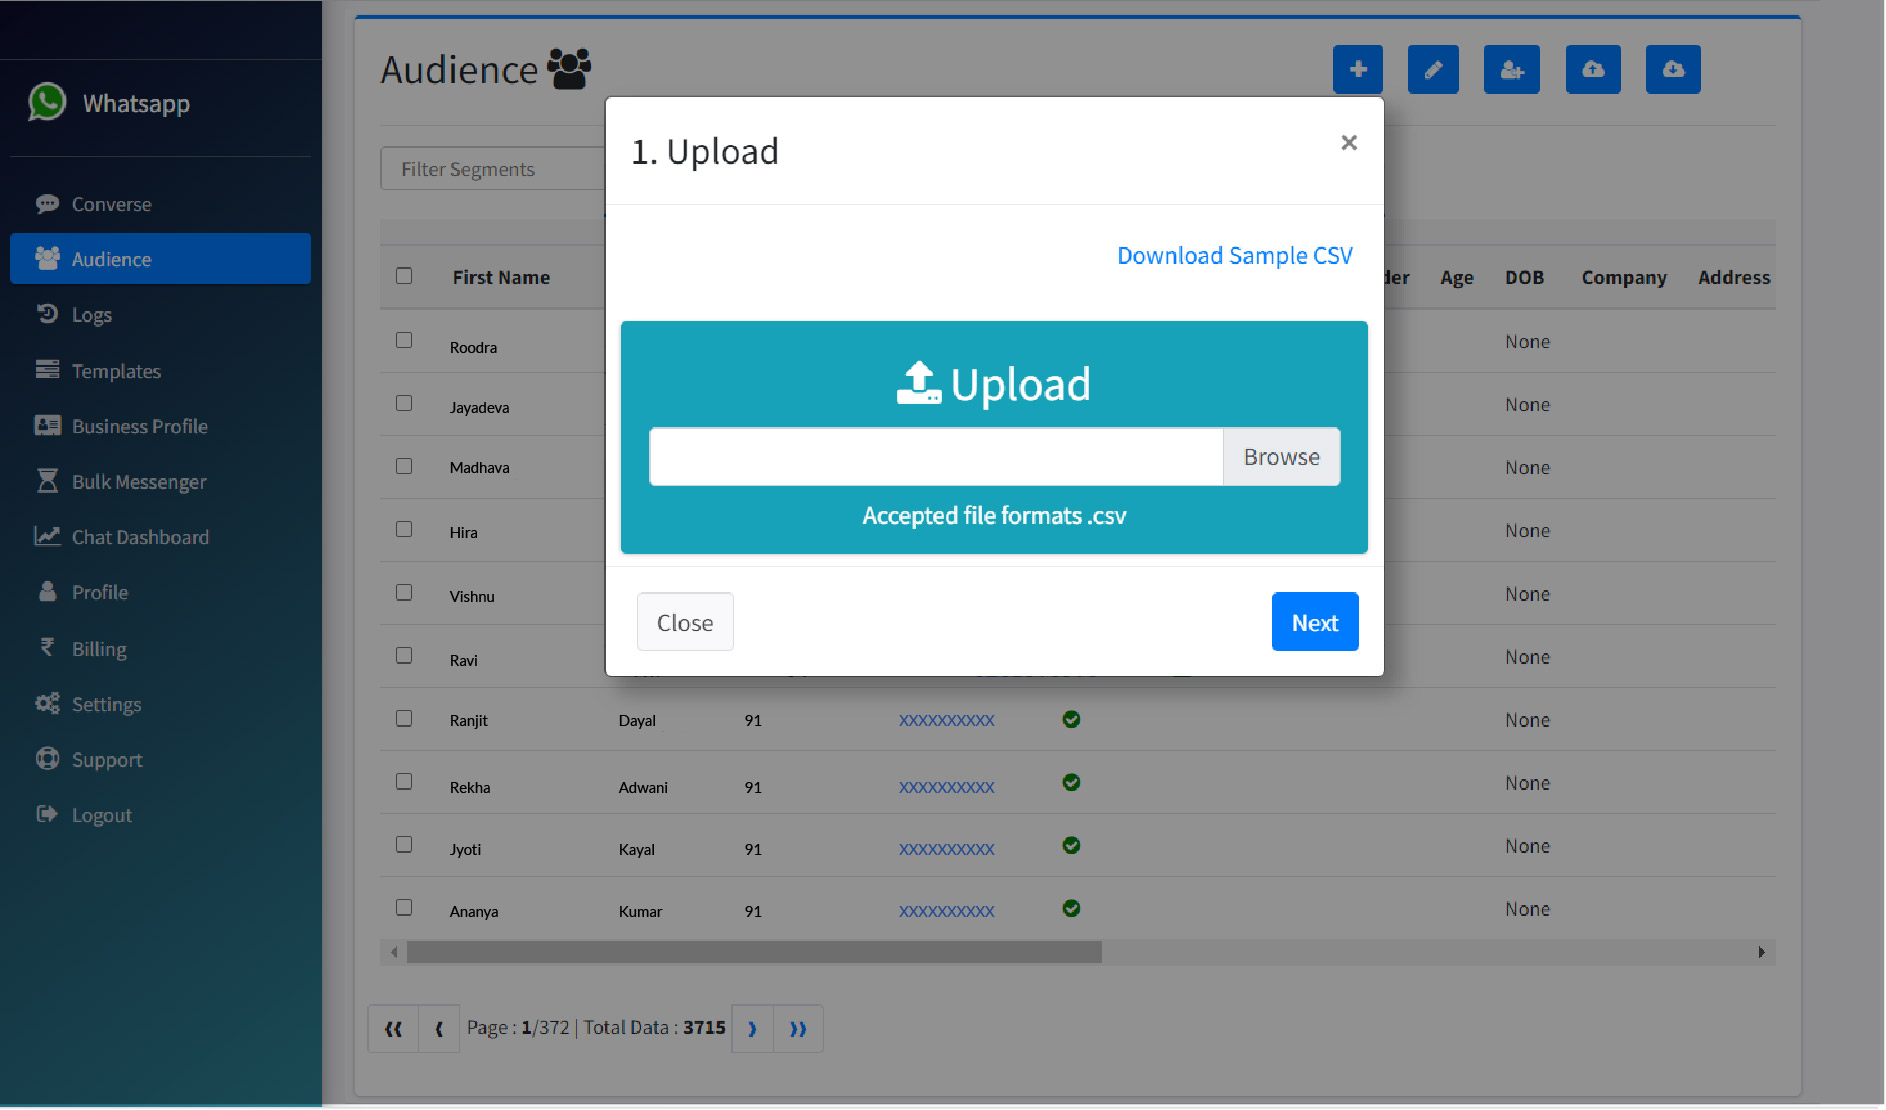 Audience Section to import or export client data and further segment the data using the tagging feature.